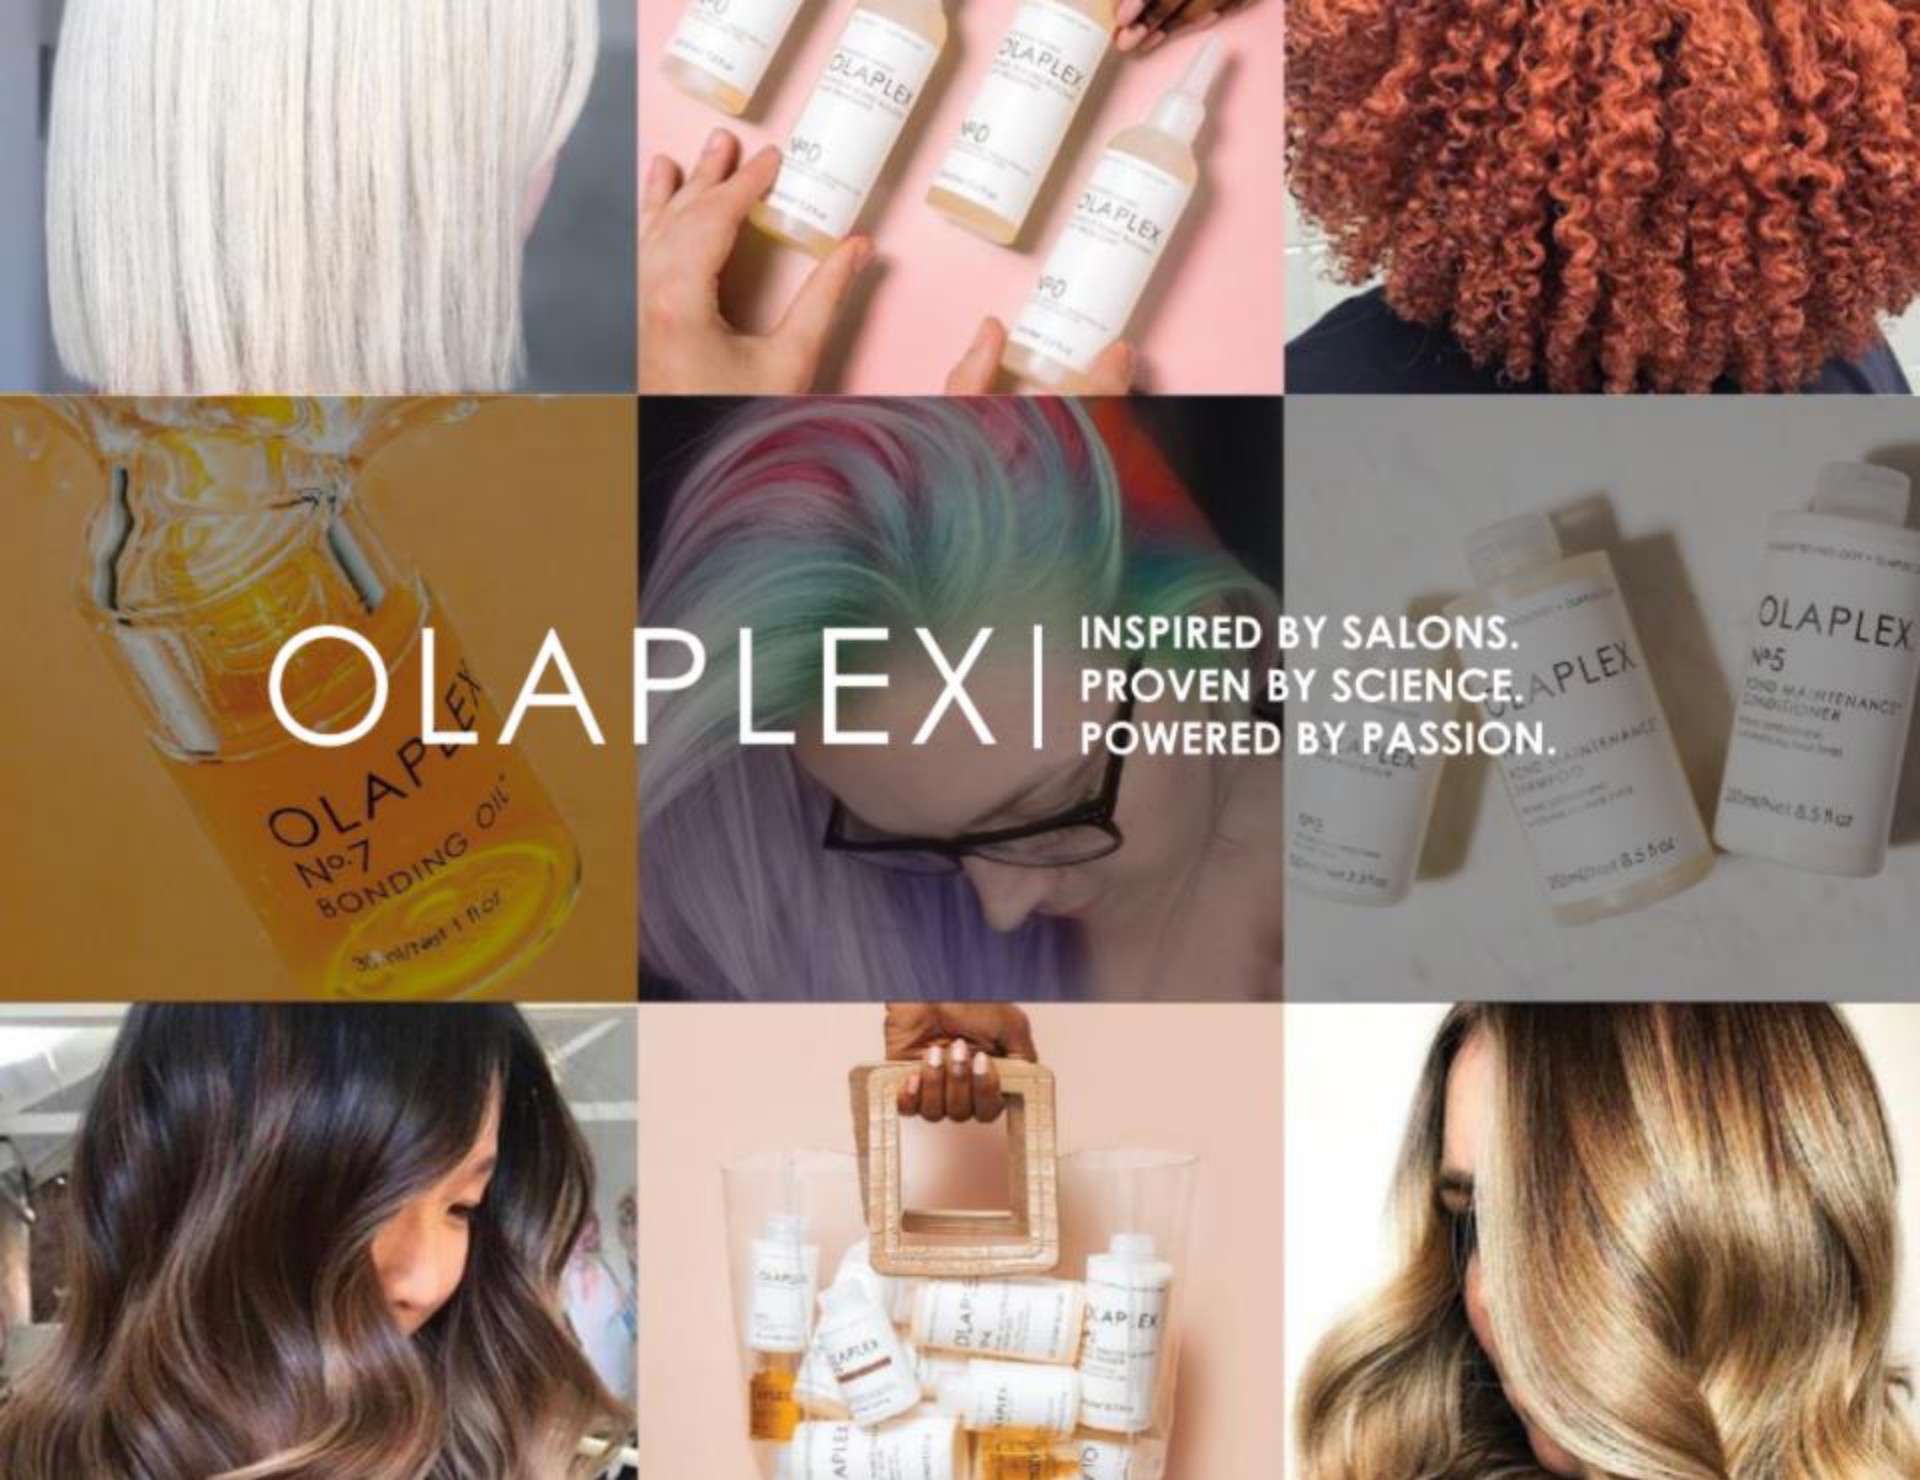 ais inspired by salons i a a proven by science | Olaplex